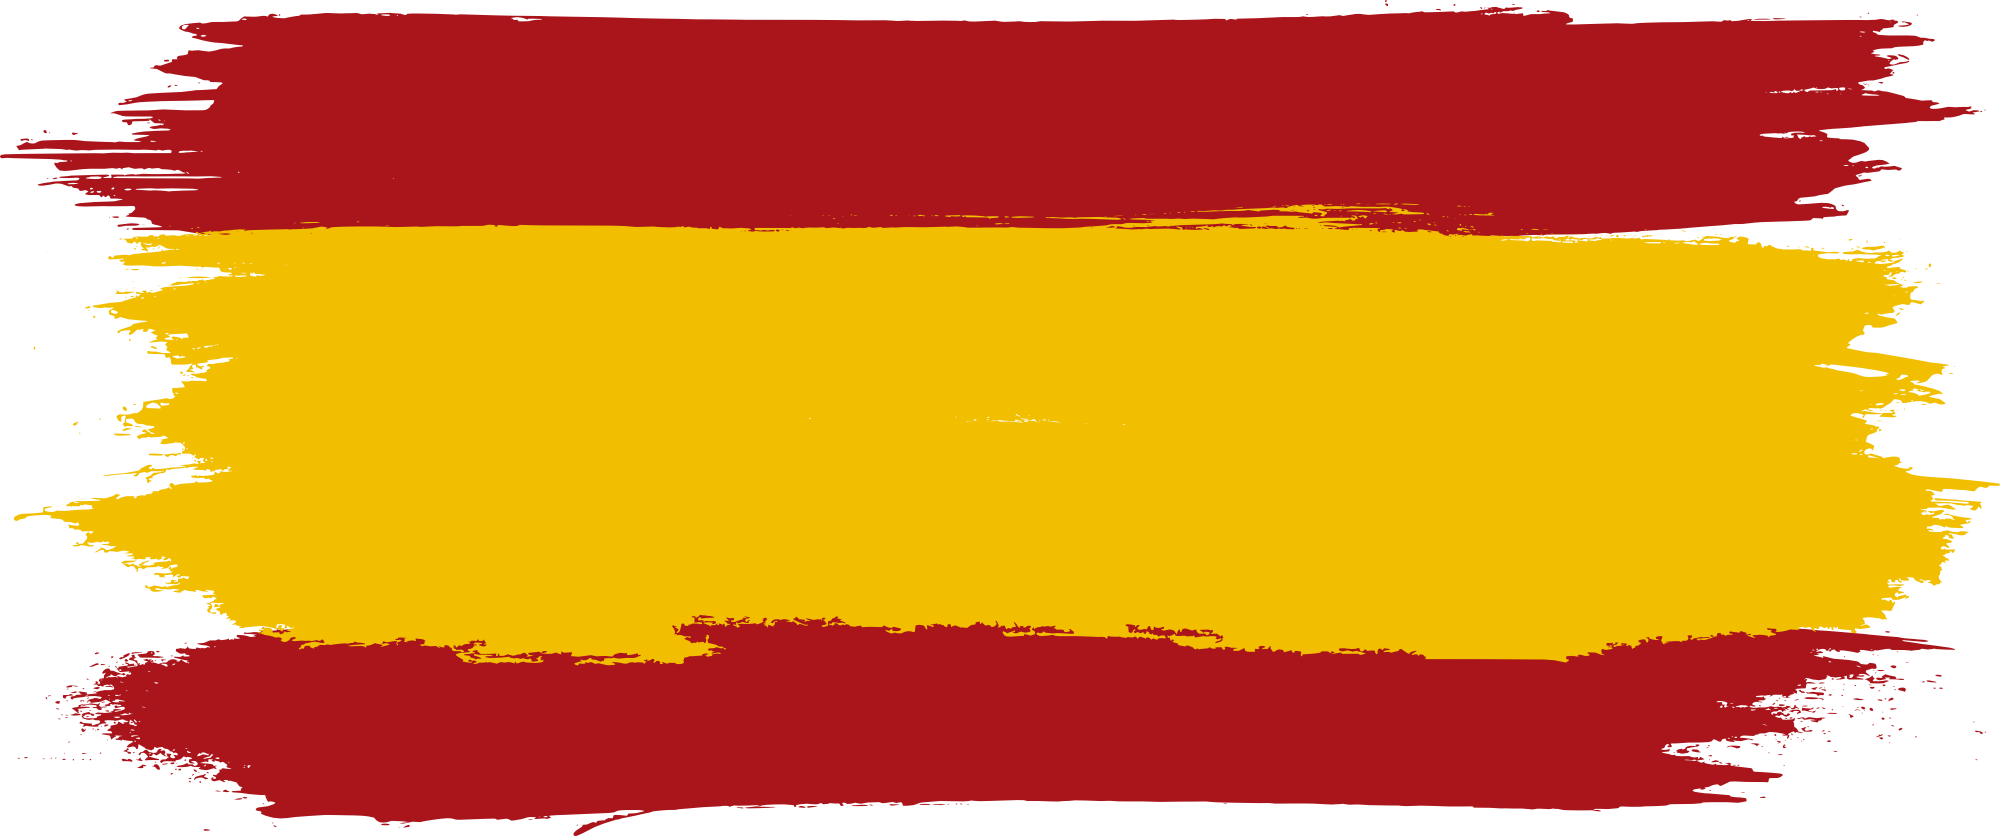 Spain Flag Png Transparent Images - Spanish Socialist Workers' Party (2000x836)